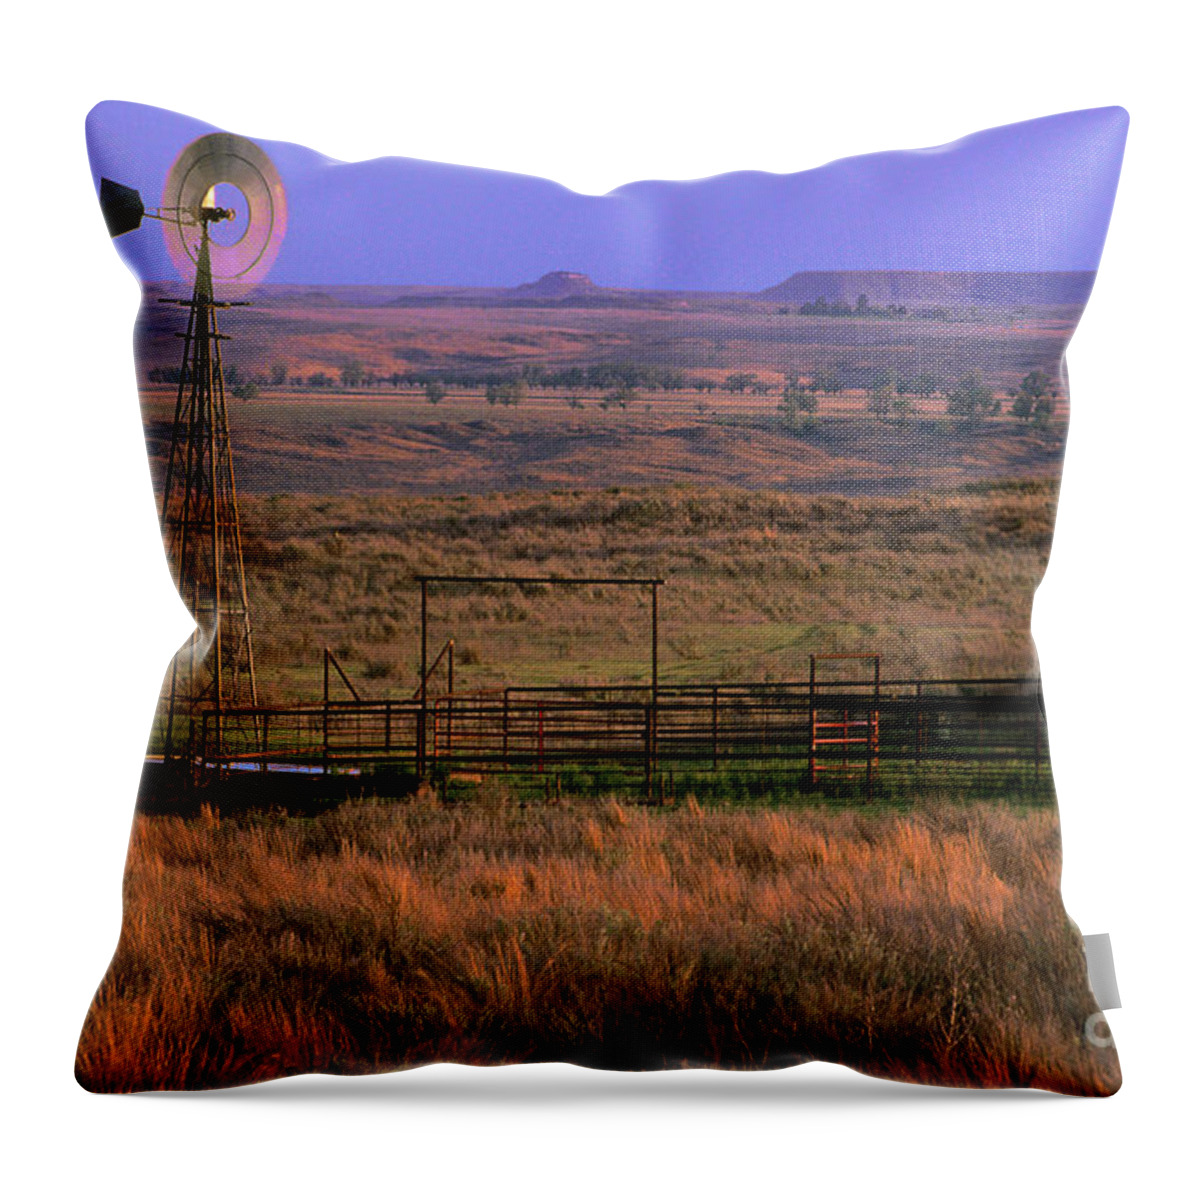 Dave Welling Throw Pillow featuring the photograph Windmill Cattle Fencing Texas Panhandle by Dave Welling